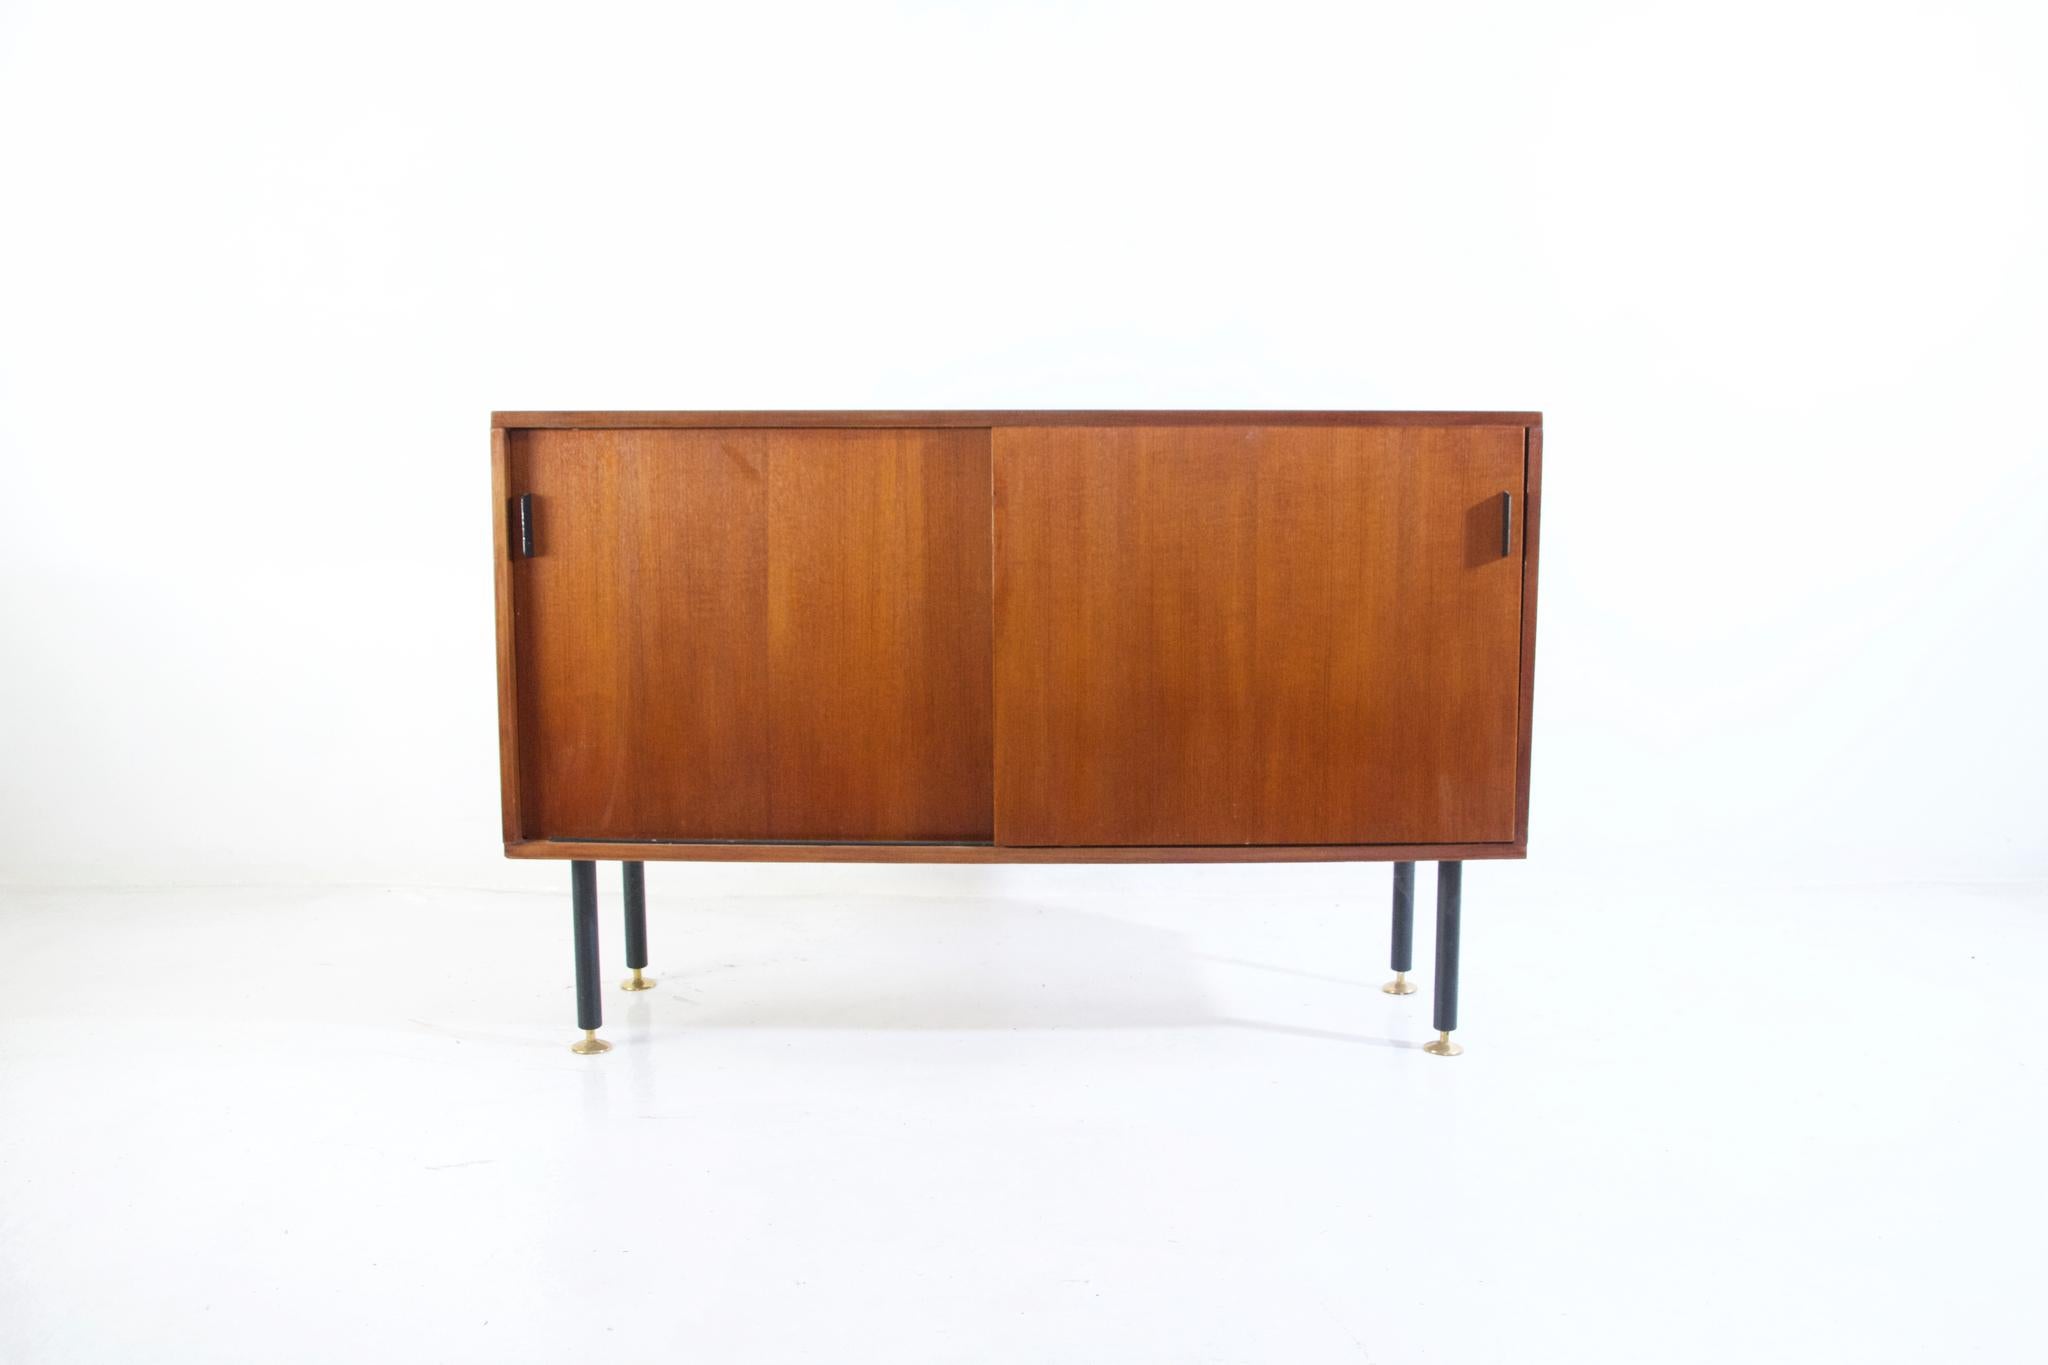 A single credenza in teak with sliding doors by german designer Herbert Hirsche, a Bauhaus Scholar, for producer Christian Holzäpfel. In very good condion with nice patina. 